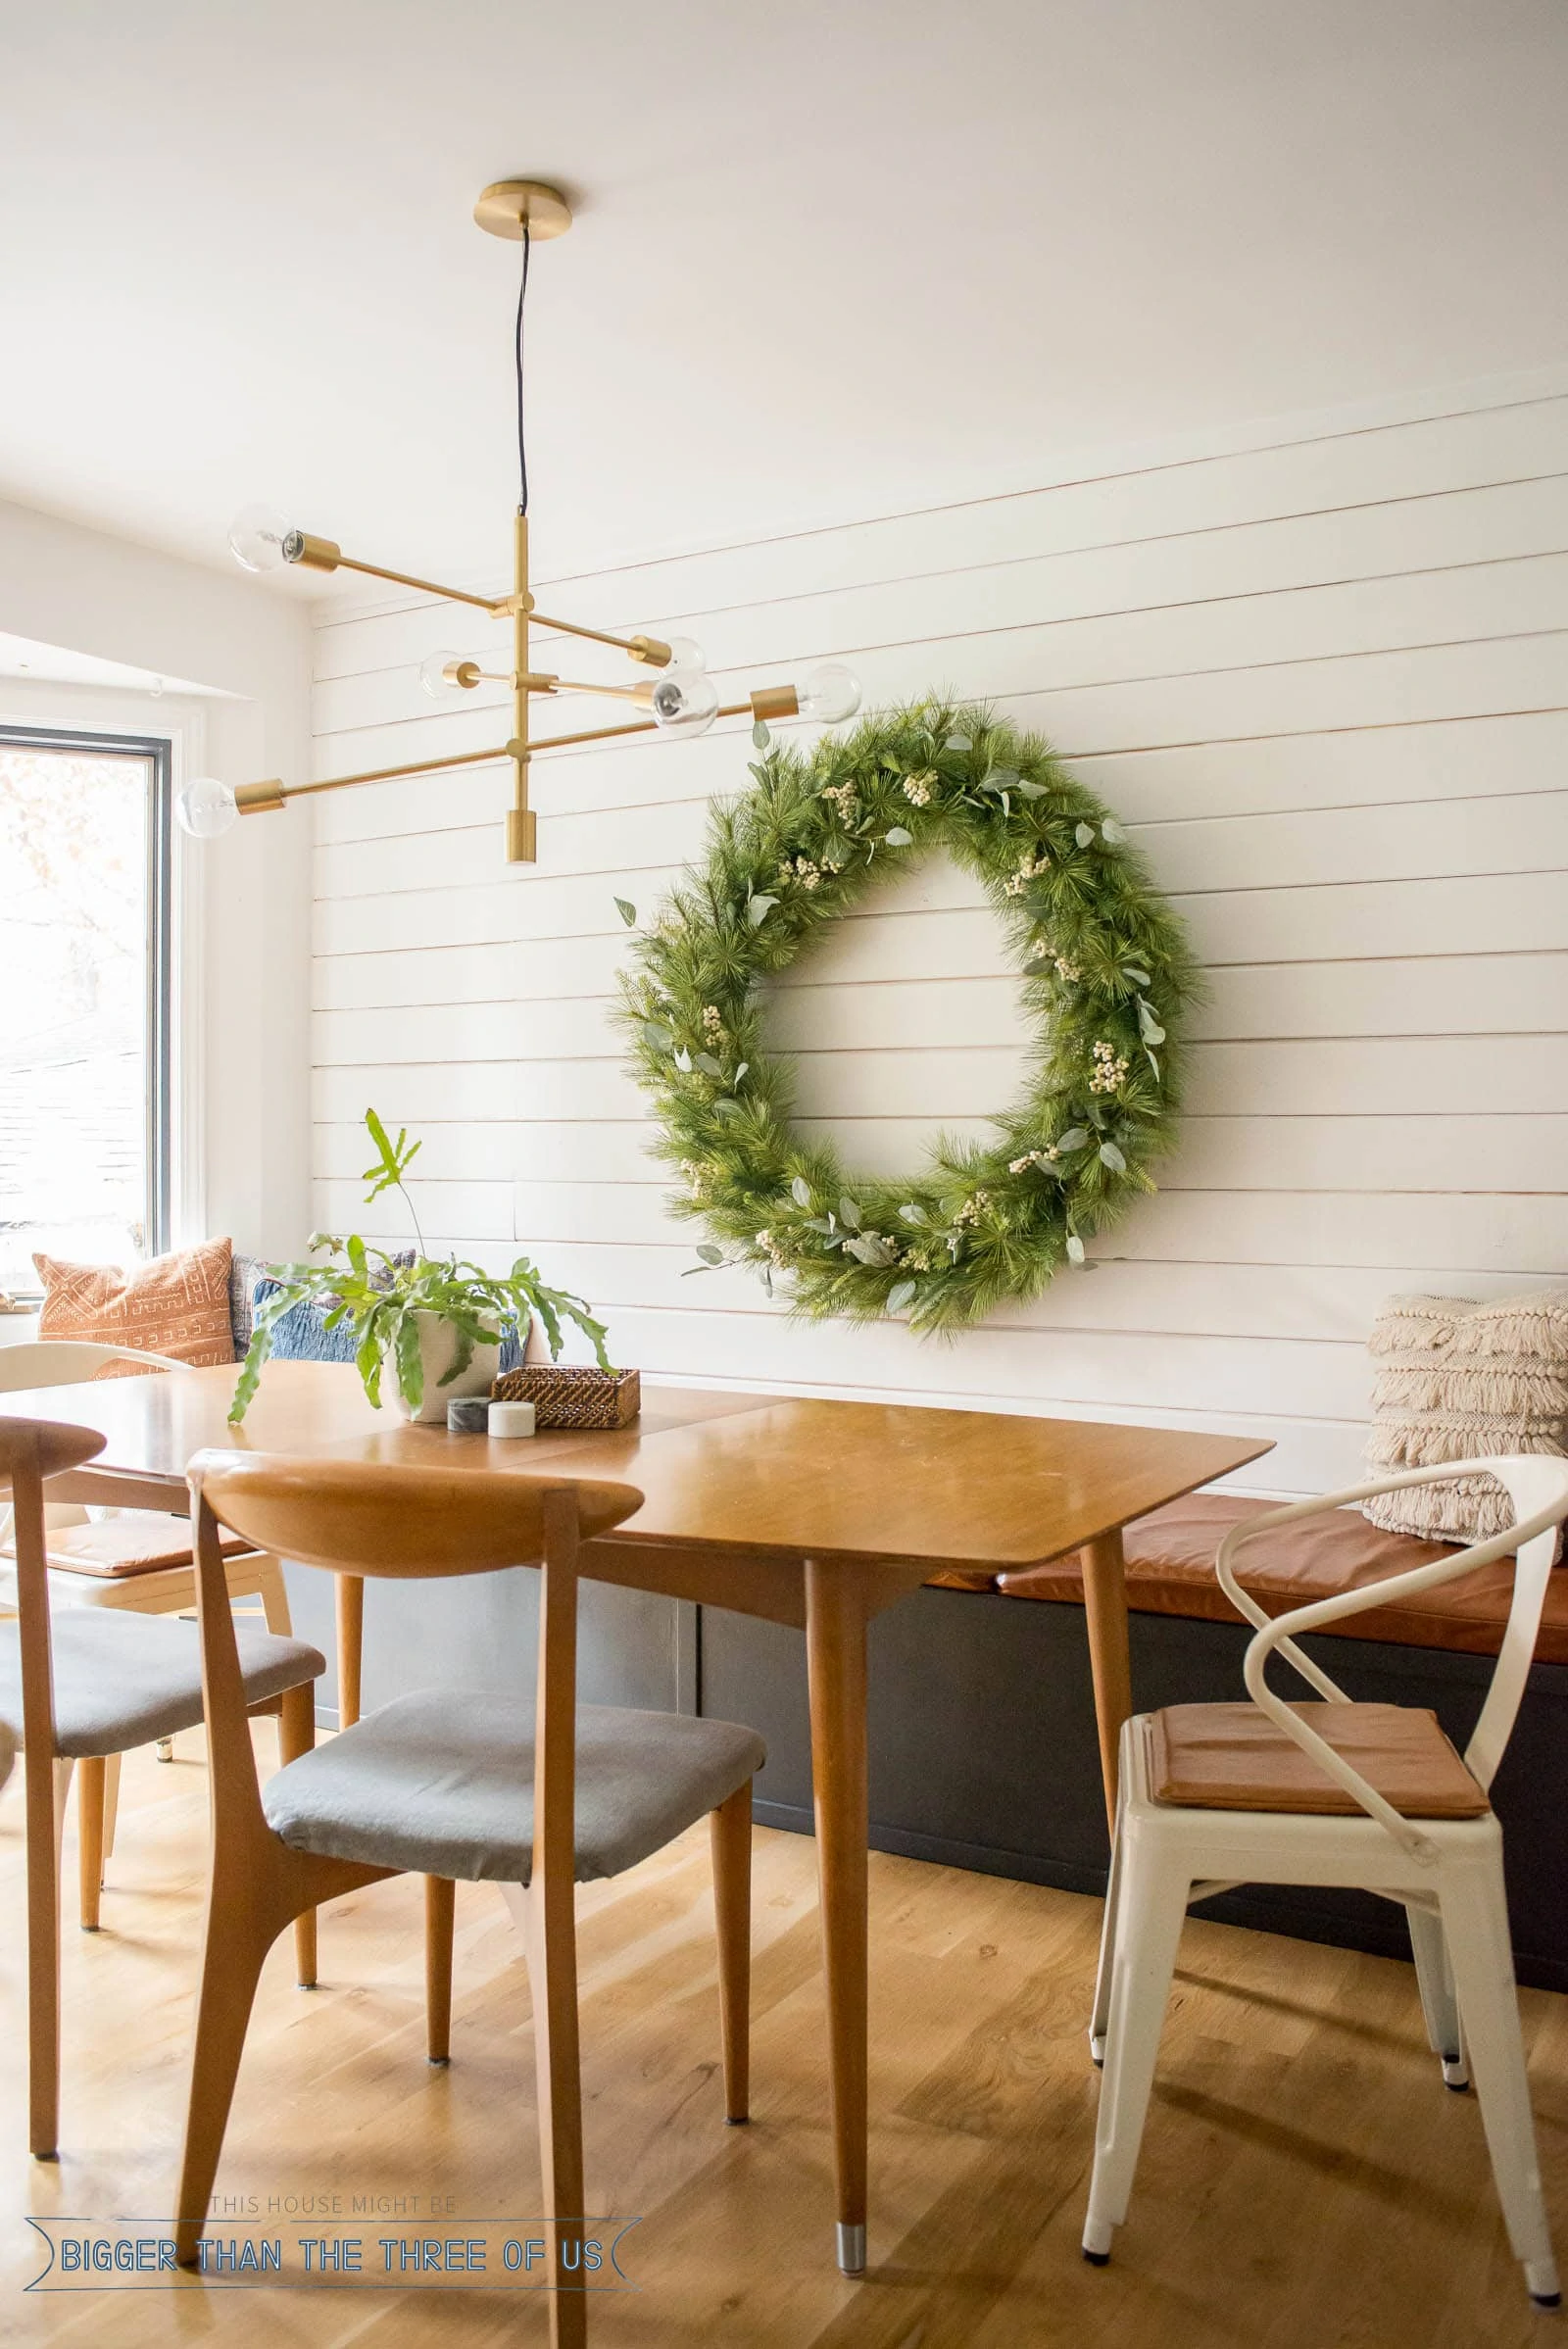 Christmas Decor in Dining room showing an oversized wreath on a shiplap wall with a built-in bench with leather cushion.